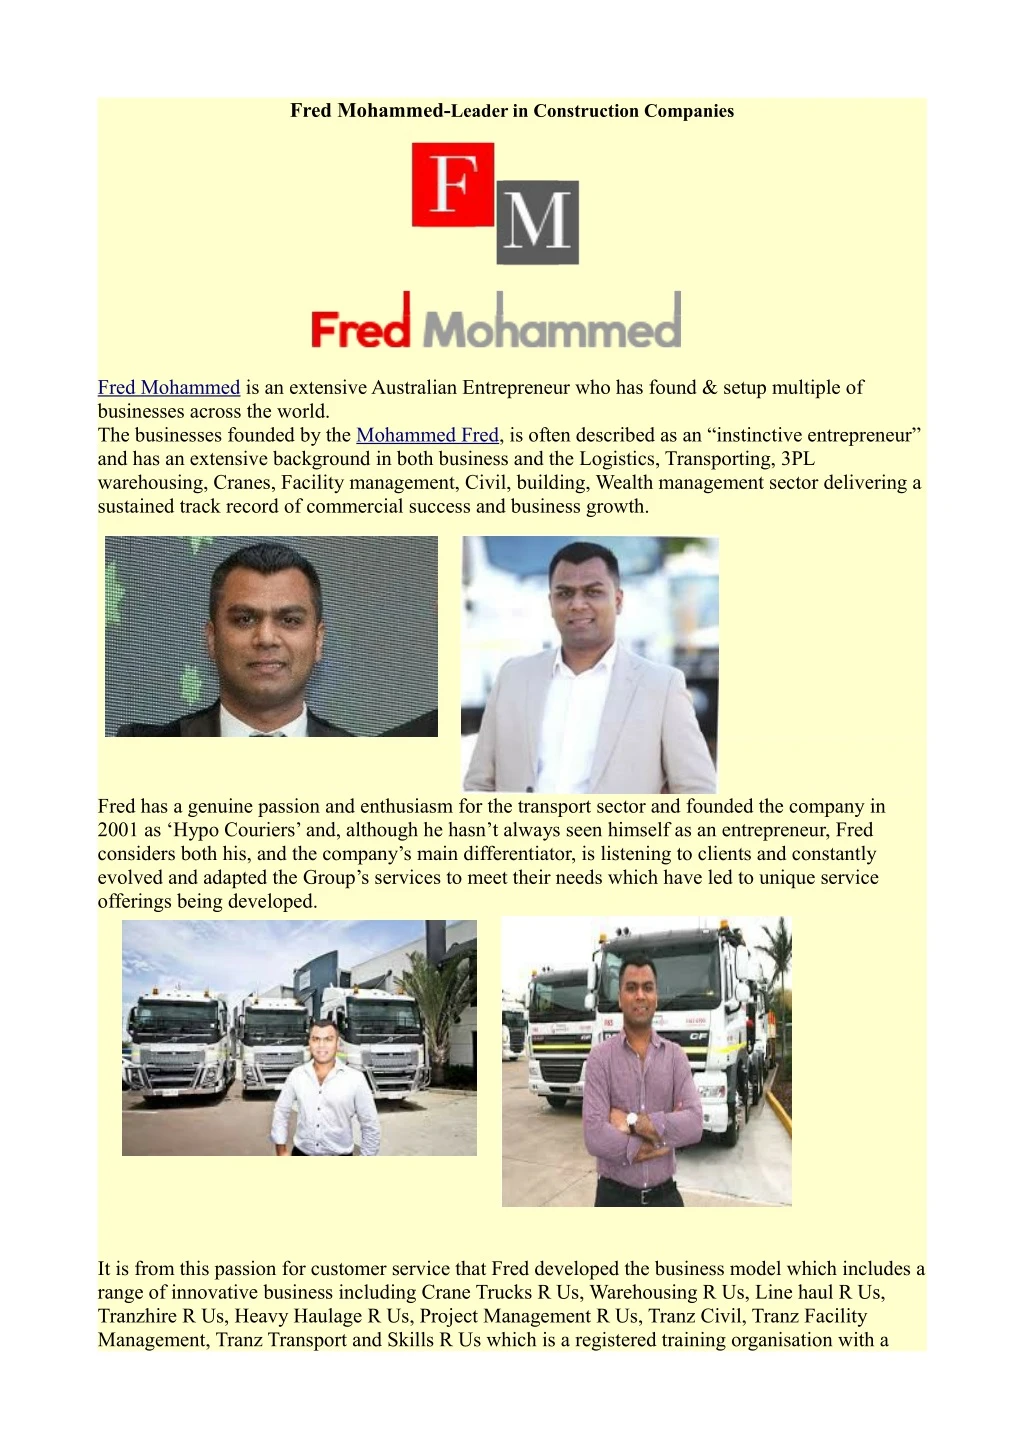 fred mohammed leader in construction companies